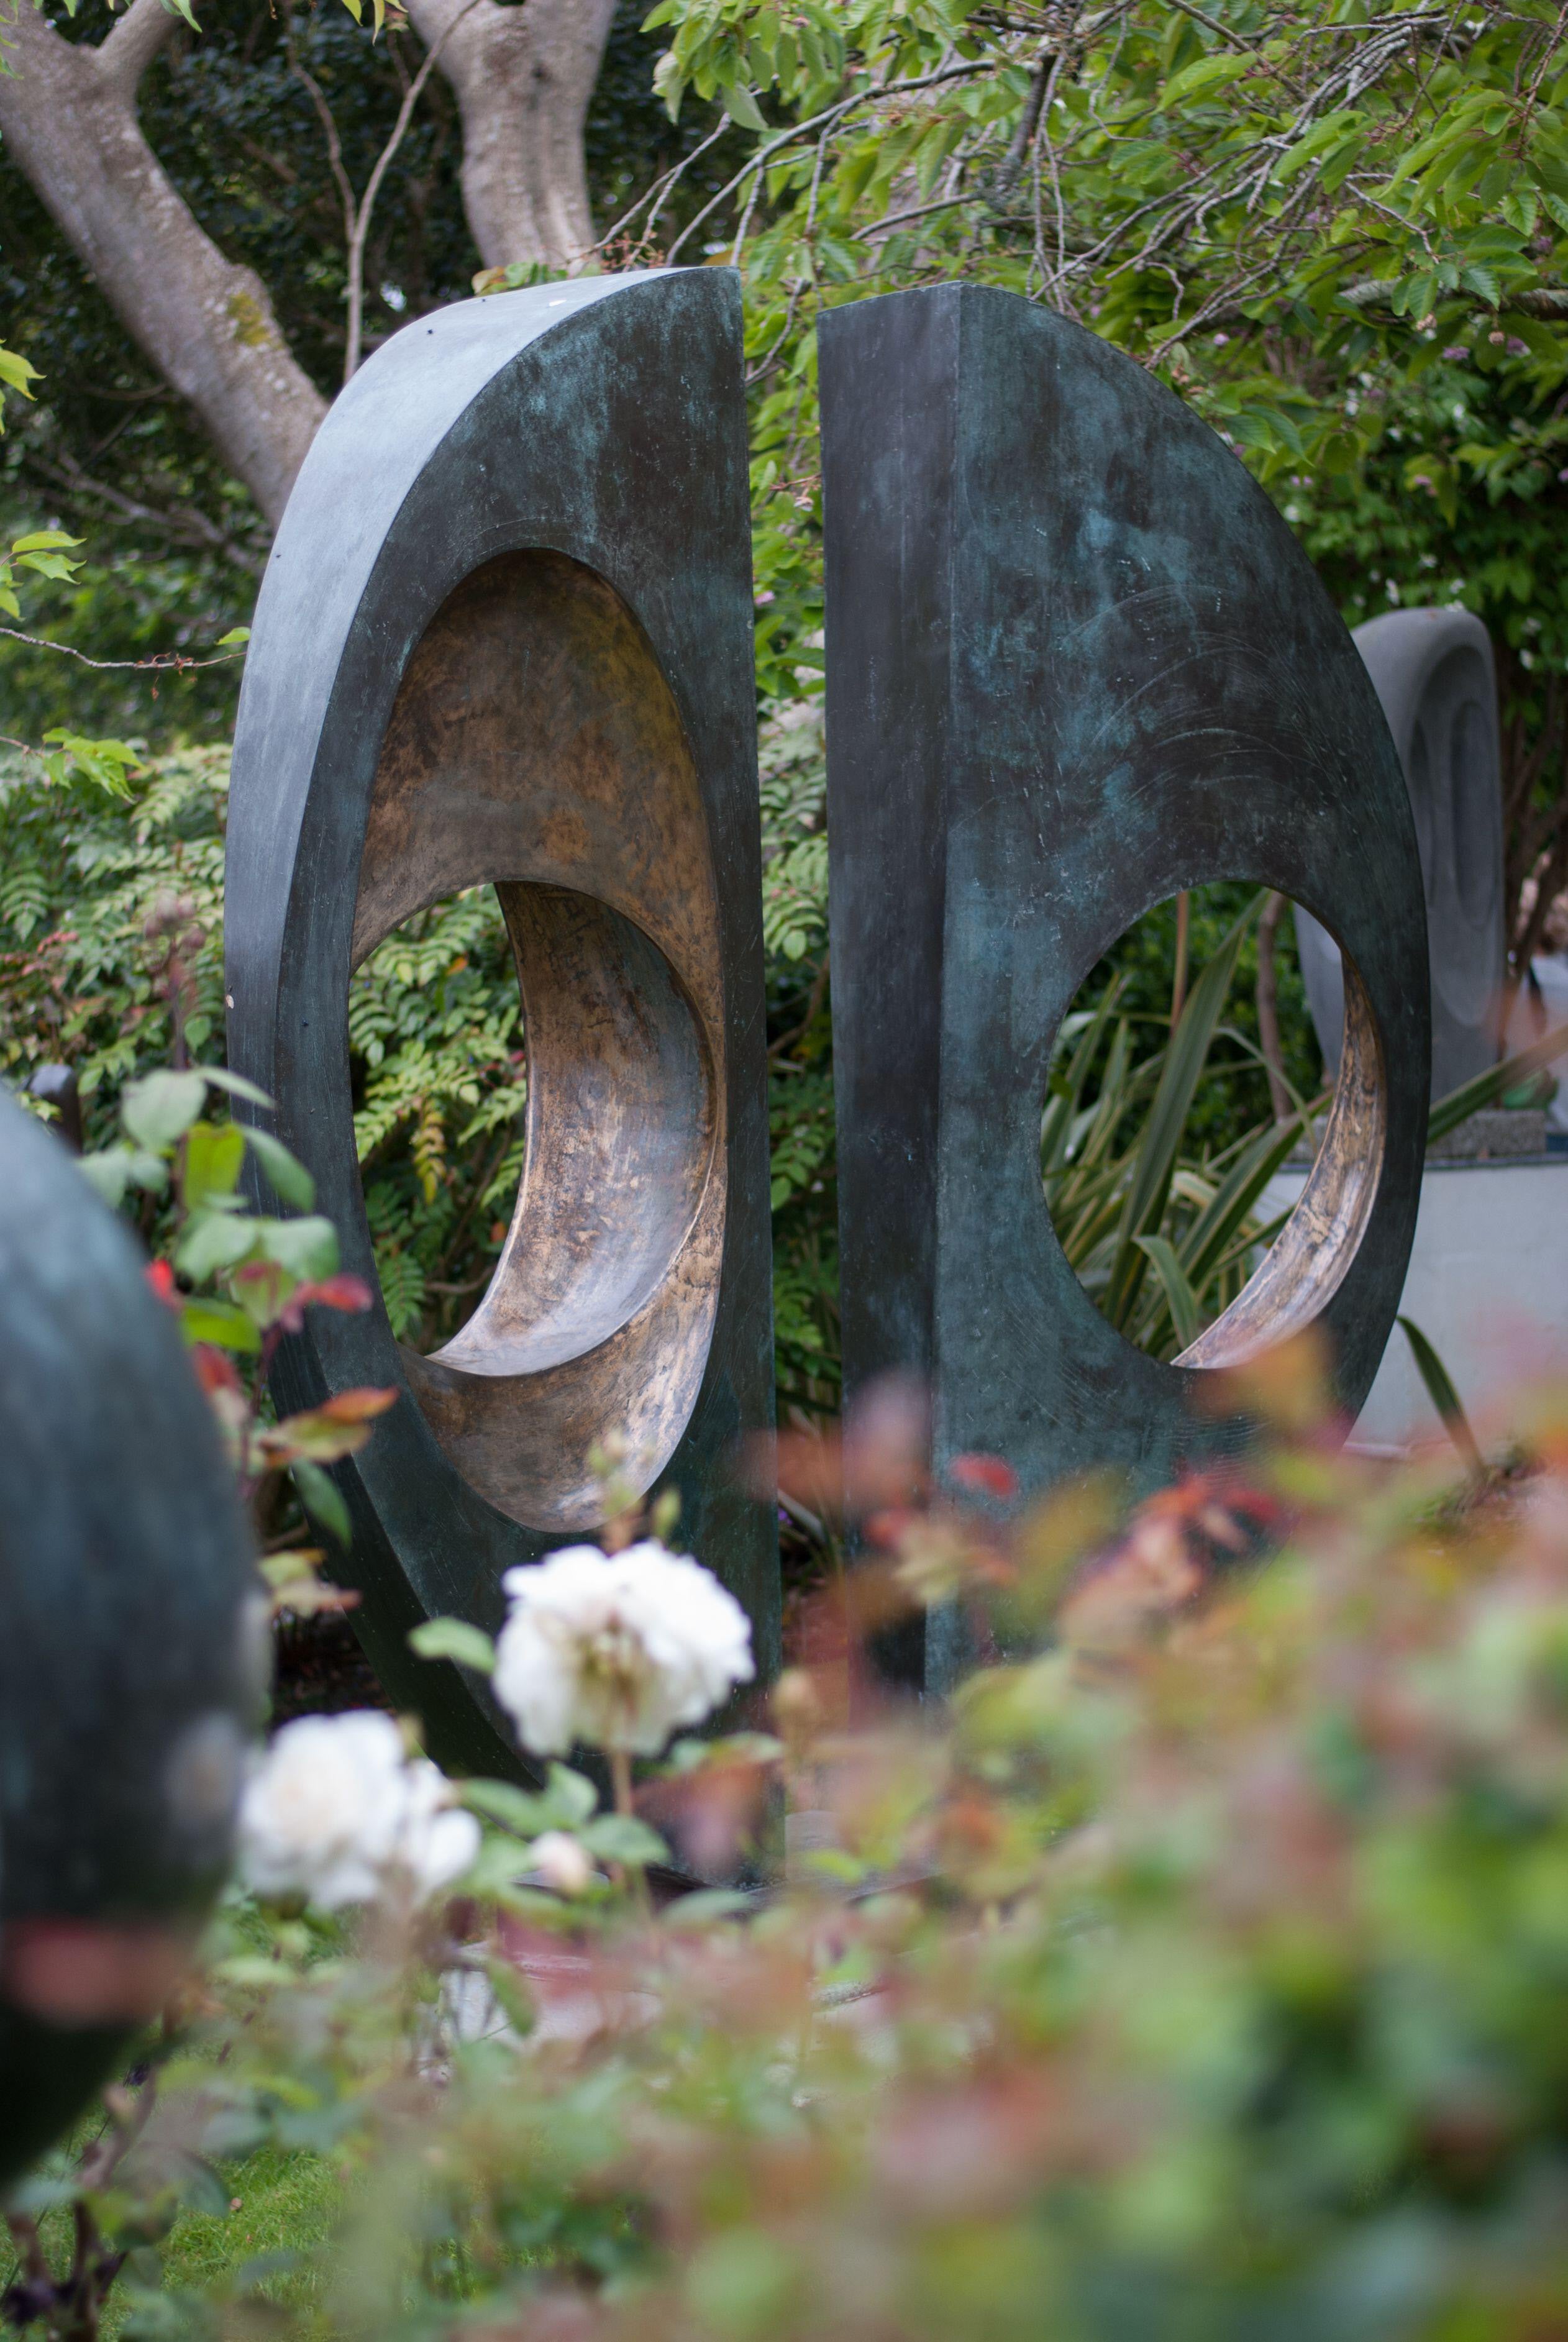 Barbara Hepworth, Two Forms (Divided Circle) in Hepworth's garden